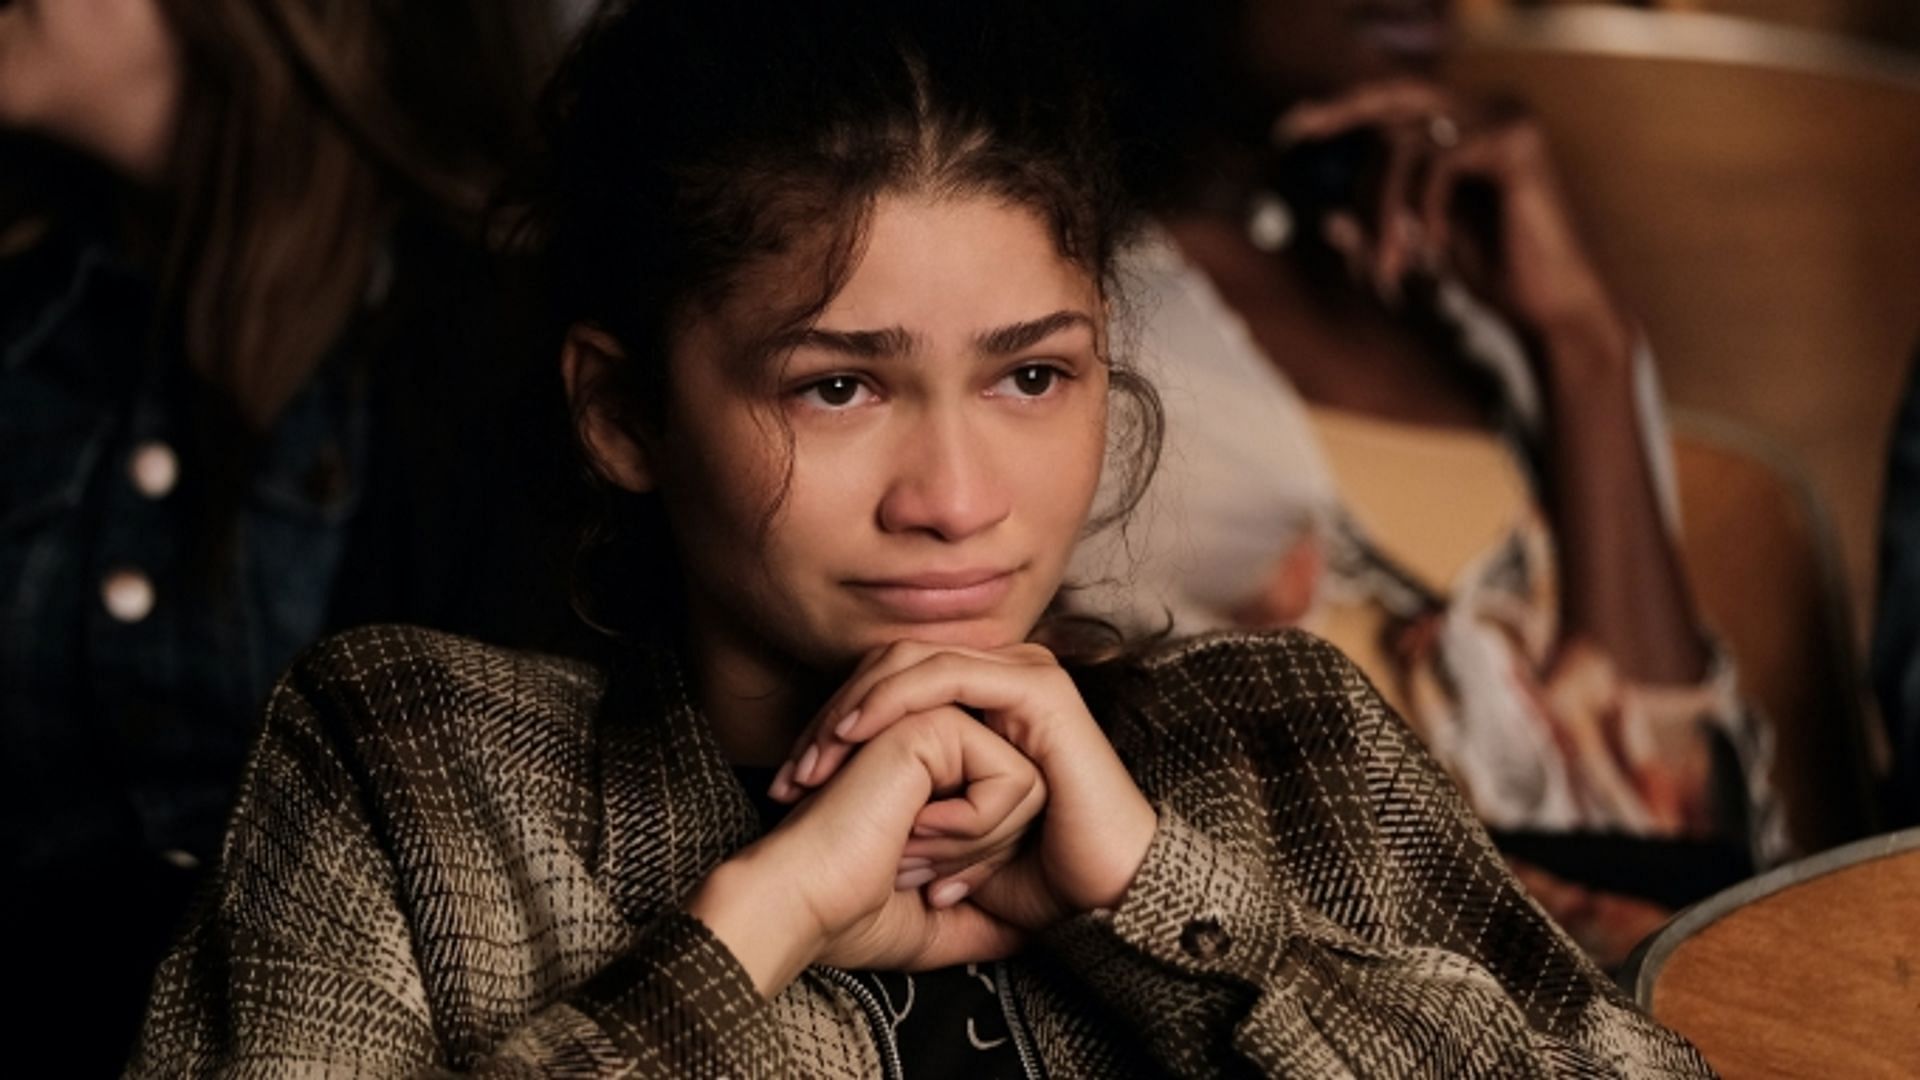 Euphoria Season 2 finale ending explained: Are Rue and Lexi friends again? (Spoilers)